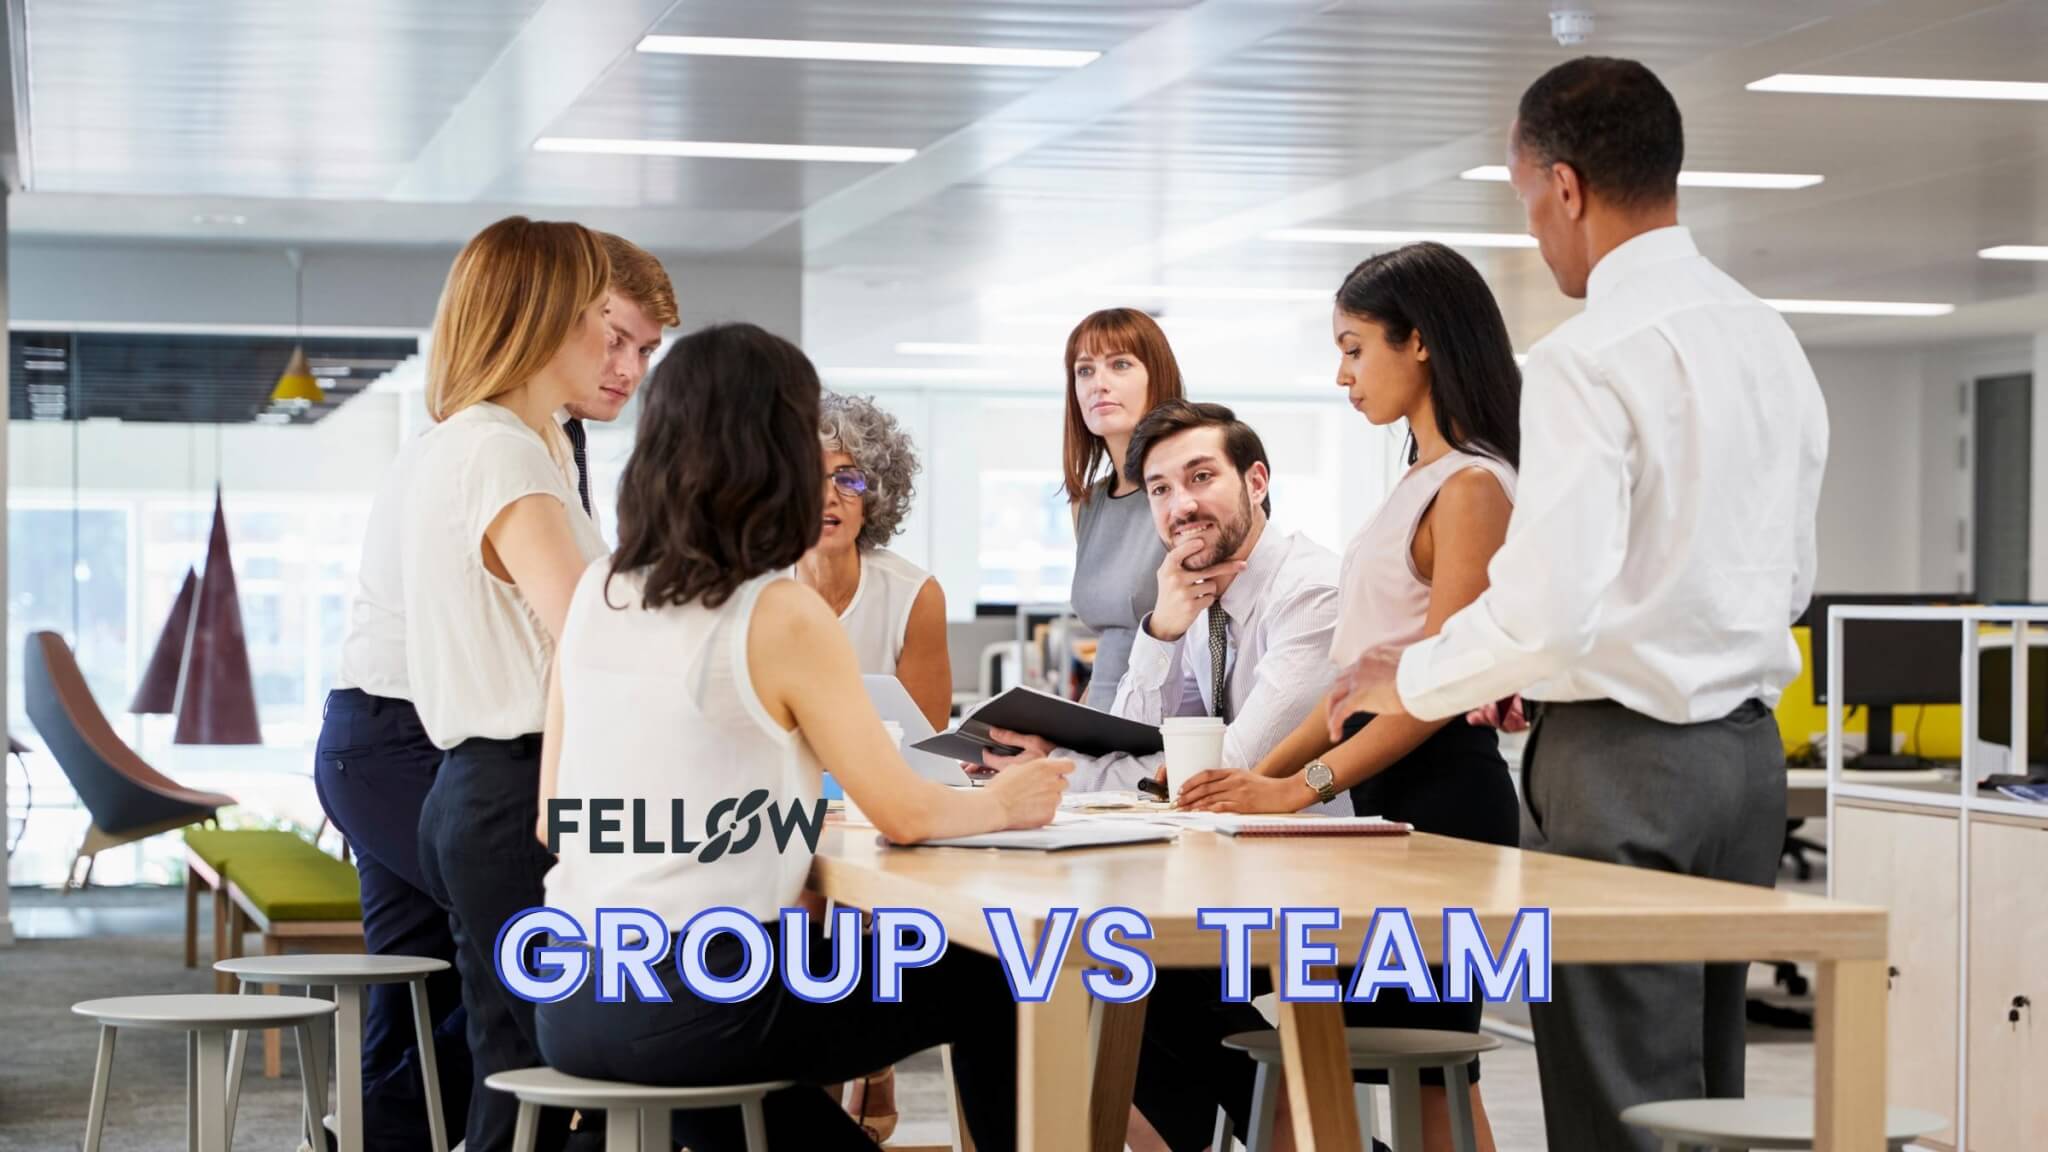 Groups vs Teams: Differences and Benefits of Each